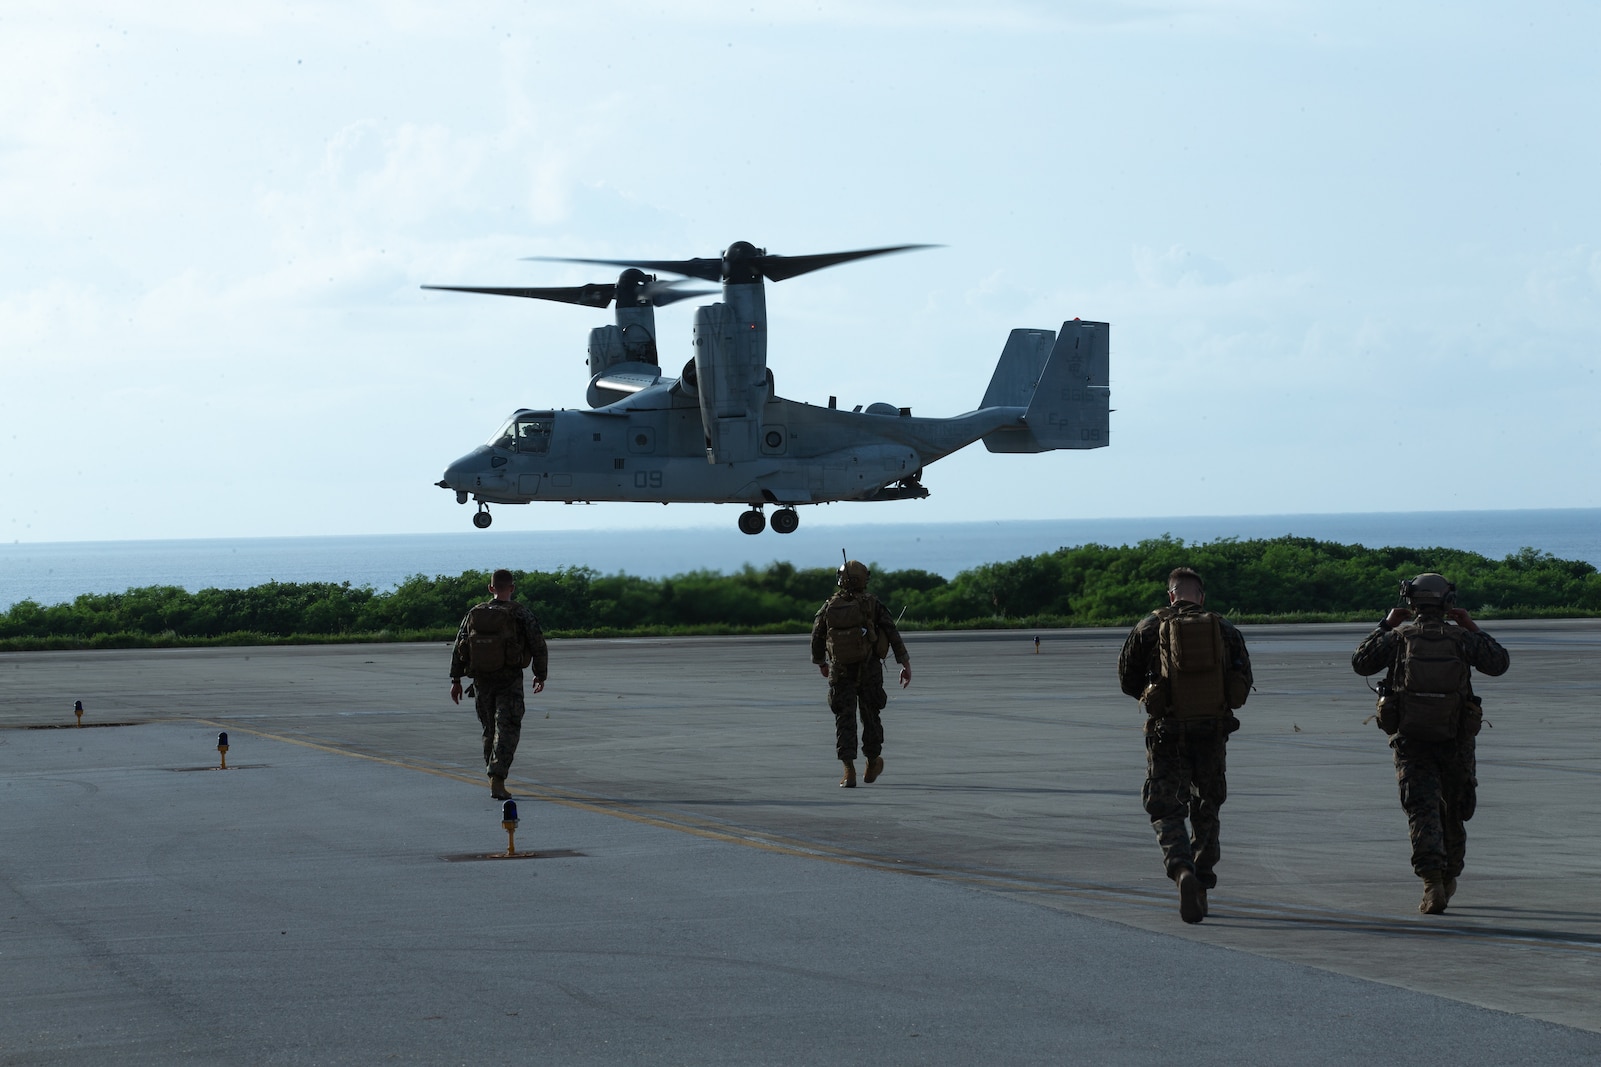 U.S. Marines with 3d Battalion, 3d Marines prepare to board an MV-22 Osprey after conducting close air support (CAS) drills on Ie Shima, Okinawa, Japan, July 14, 2022. 3/3’s Joint Terminal Aircraft Controllers conducted CAS training to hone their proficiency in coordinating precision fires from aircraft. 3/3 is forward deployed in the Indo-Pacific under 4th Marines, 3d Marine Division as part of the Unit Deployment Program. (U.S. Marine Corps photo by Lance Cpl. Michael Taggart)